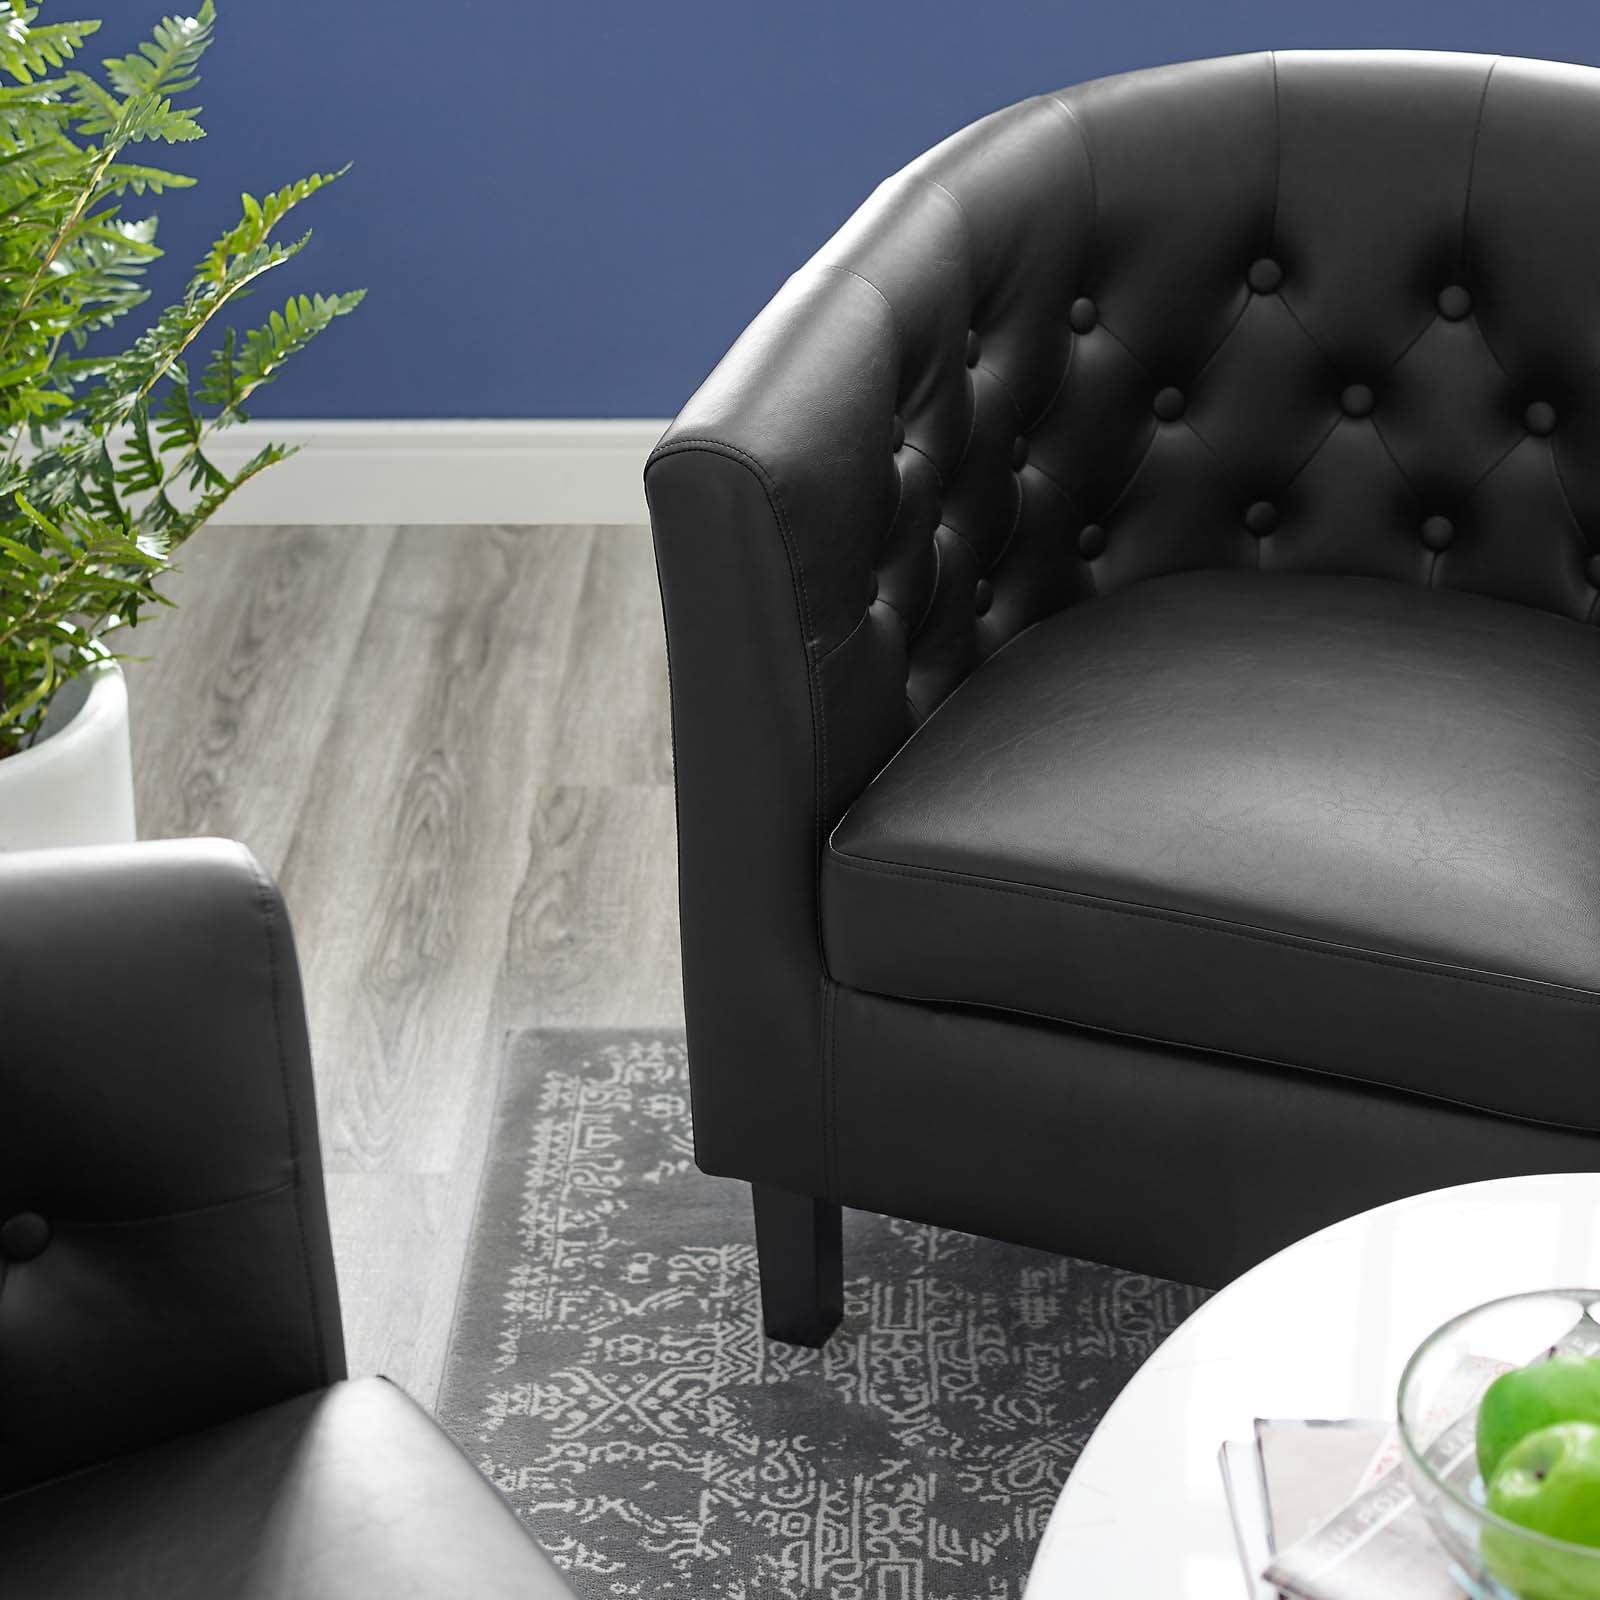 Modway Accent Chairs - Prospect Upholstered Vinyl Armchair Black